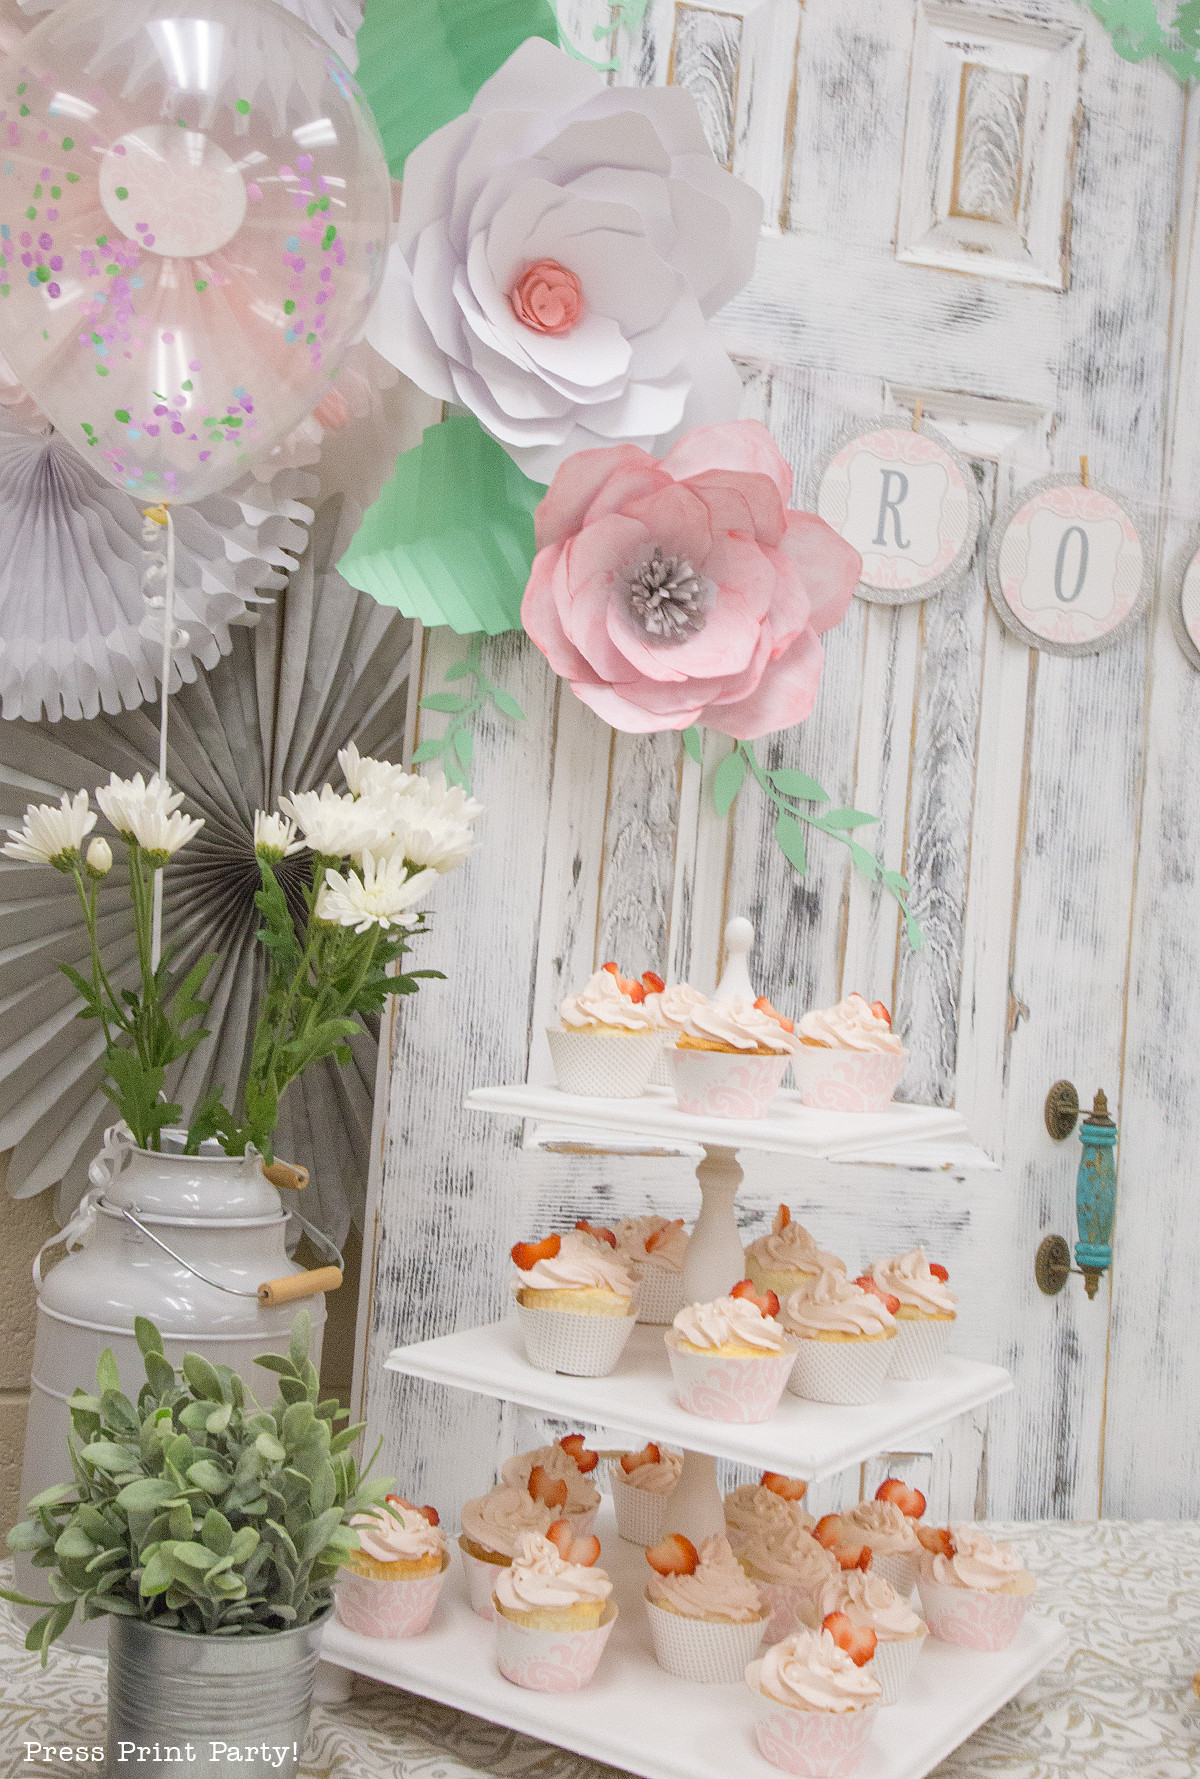 Decoration Ideas For Baby Shower
 A Sweet Vintage Baby Shower By Press Print Party